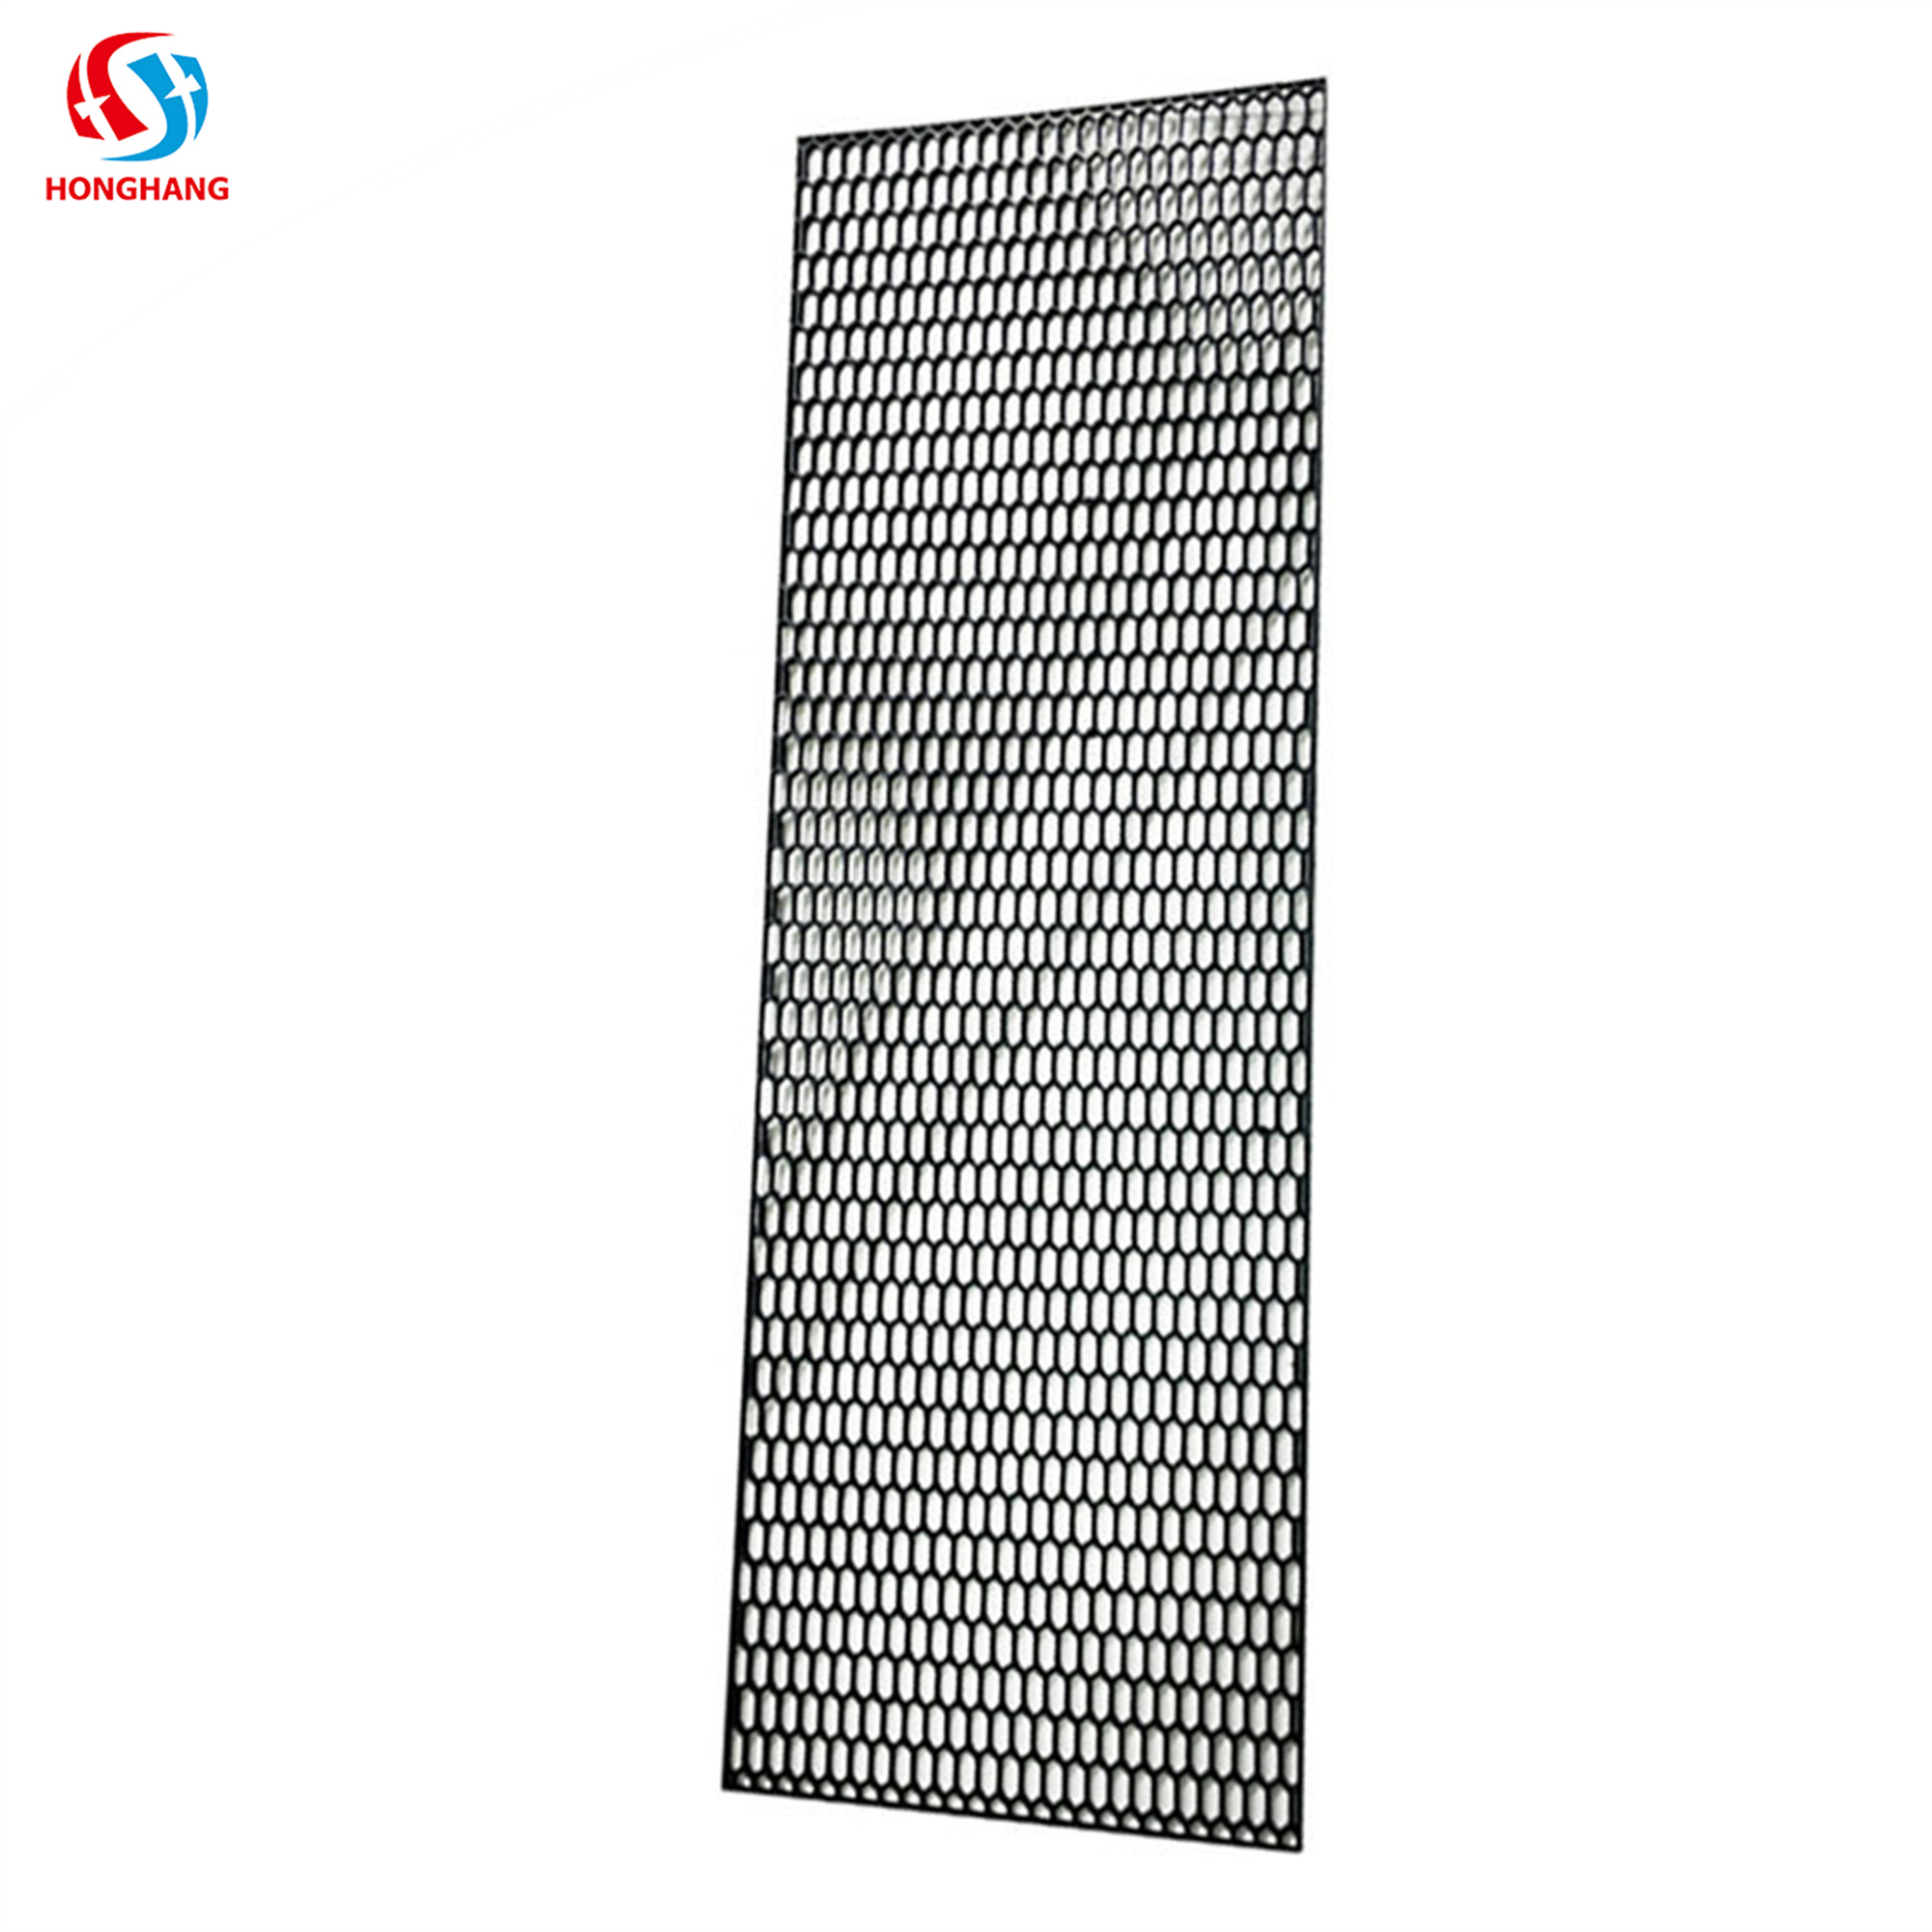 Type A 120*40cm Universal Front Bumper Grille For All Cars